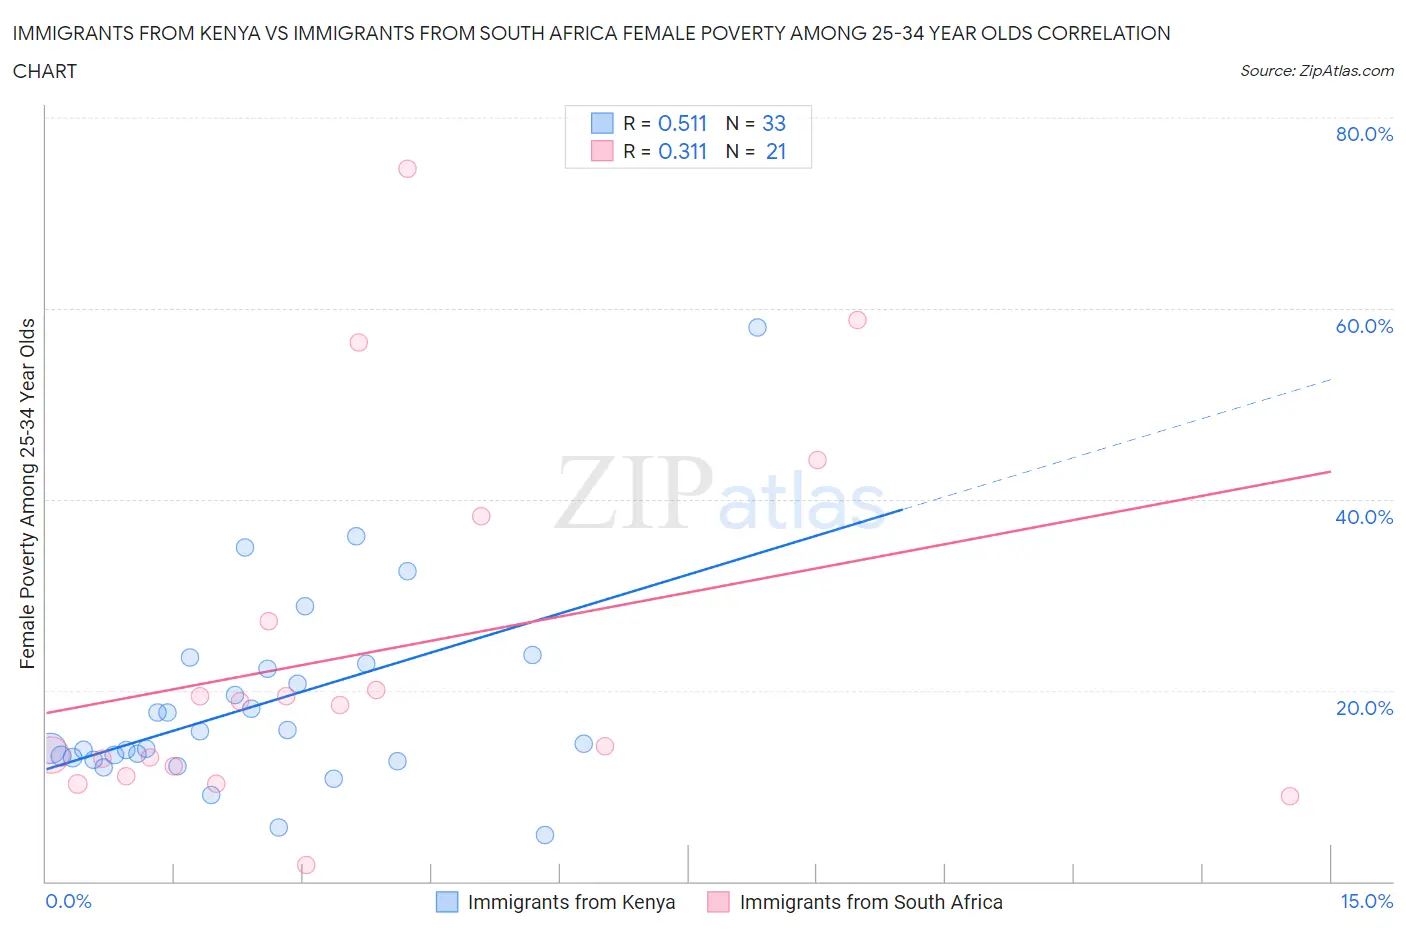 Immigrants from Kenya vs Immigrants from South Africa Female Poverty Among 25-34 Year Olds